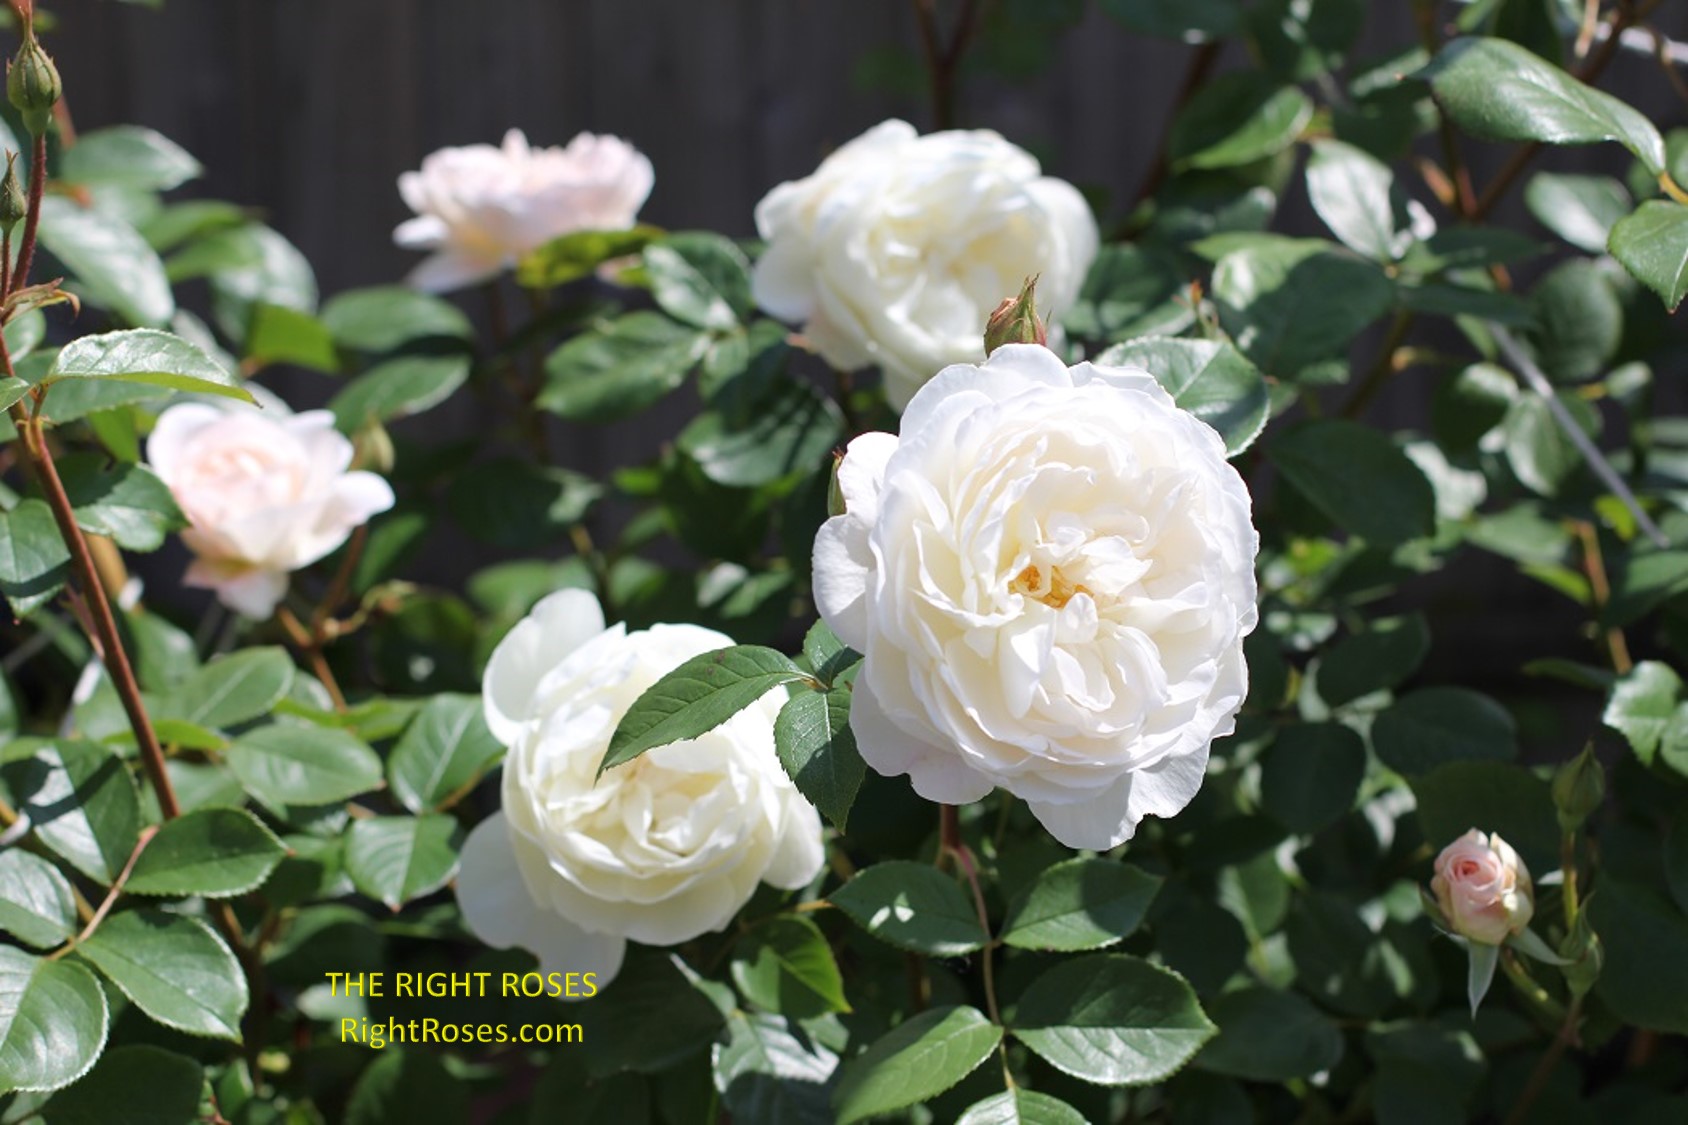 desdemona rose review the right roses score best top garden store david austin english roses rose products rose rating the right leap rose food